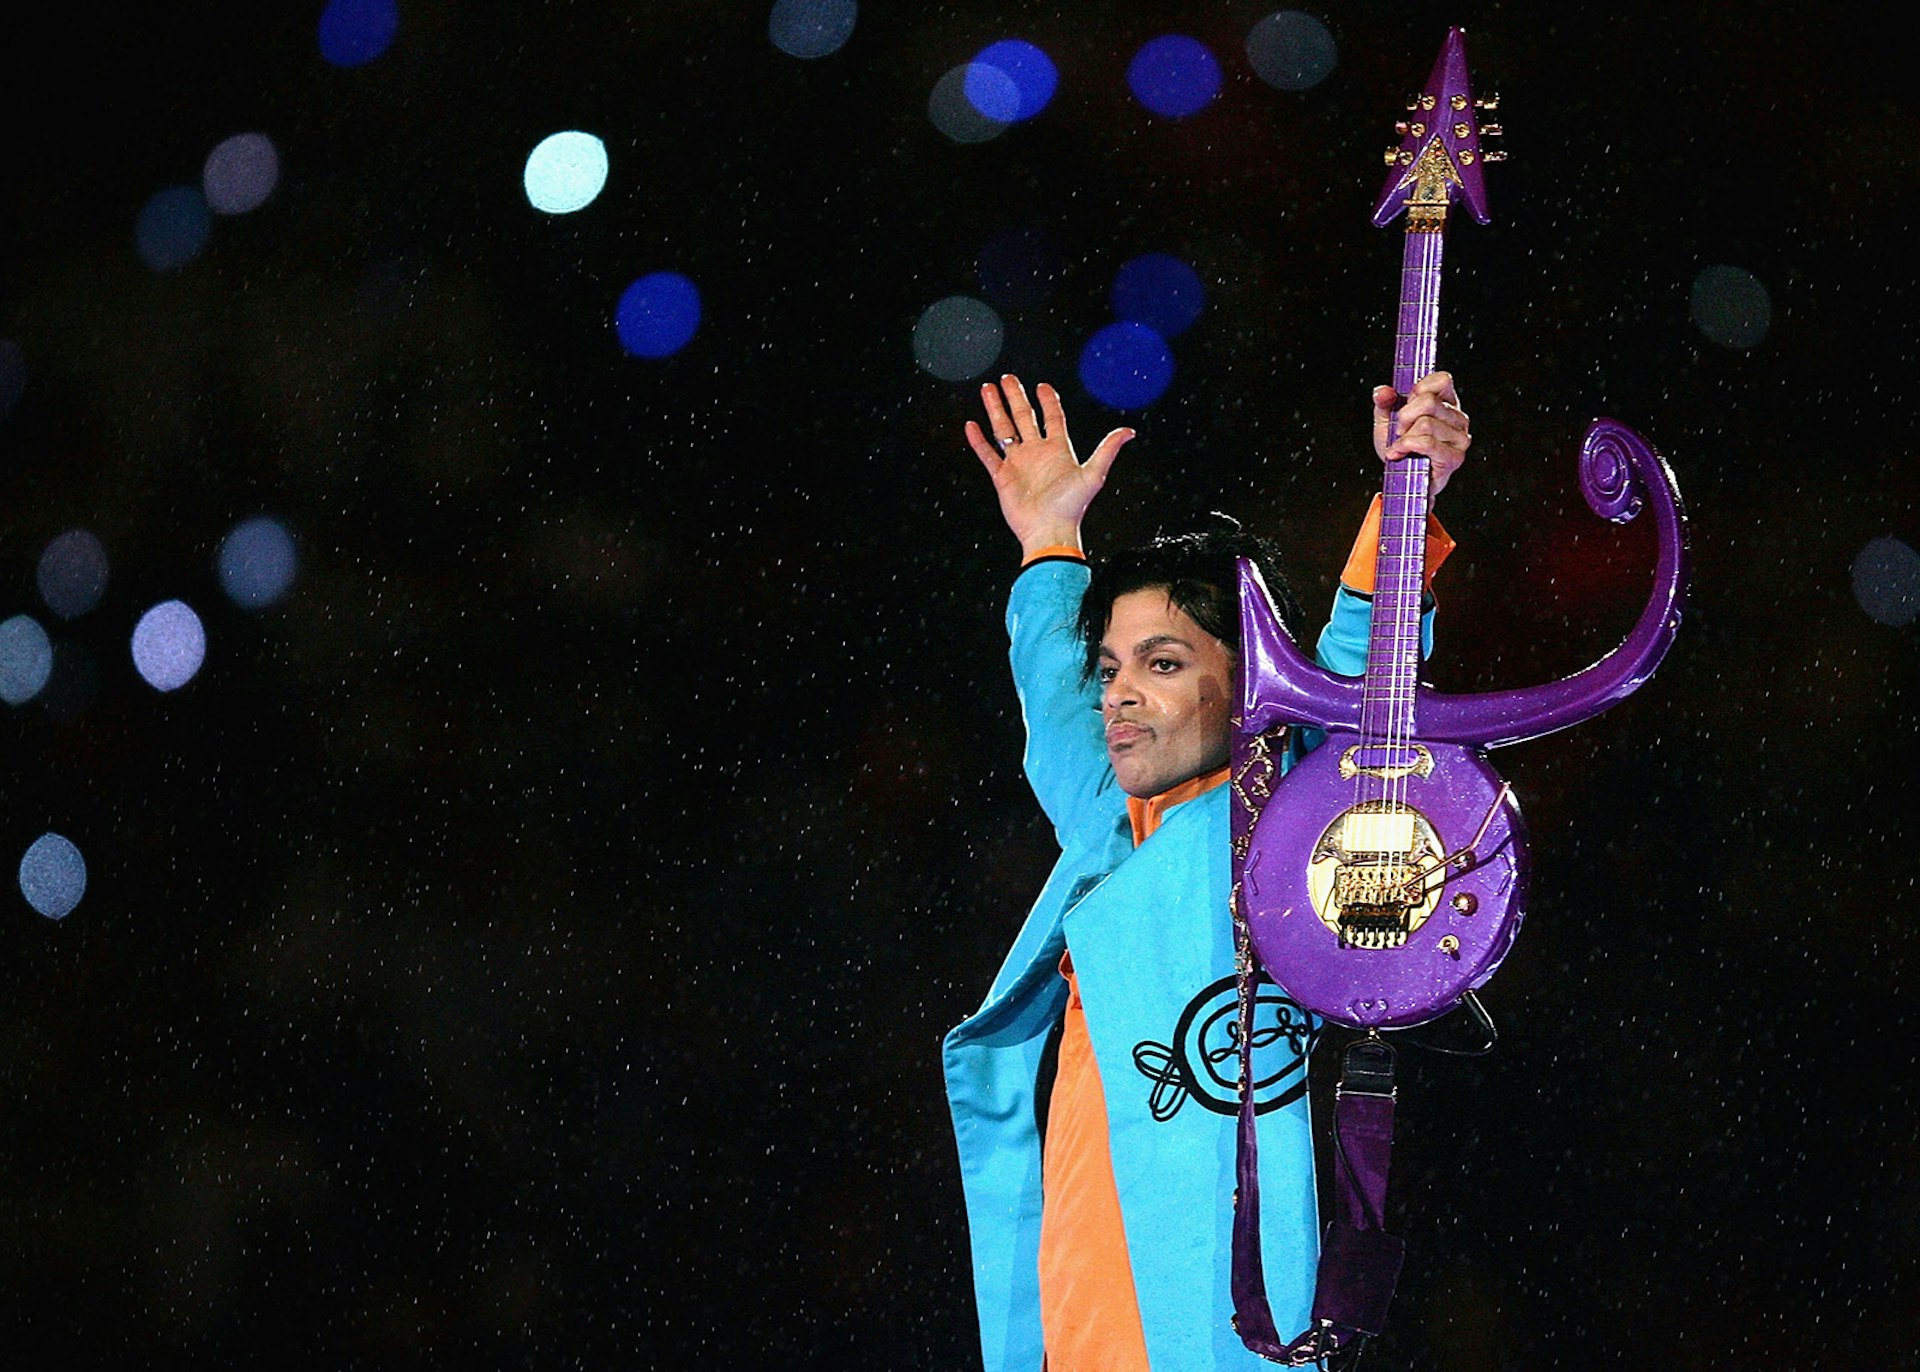 Prince performs at Super Bowl XL © Jonathan Daniel / Getty Images